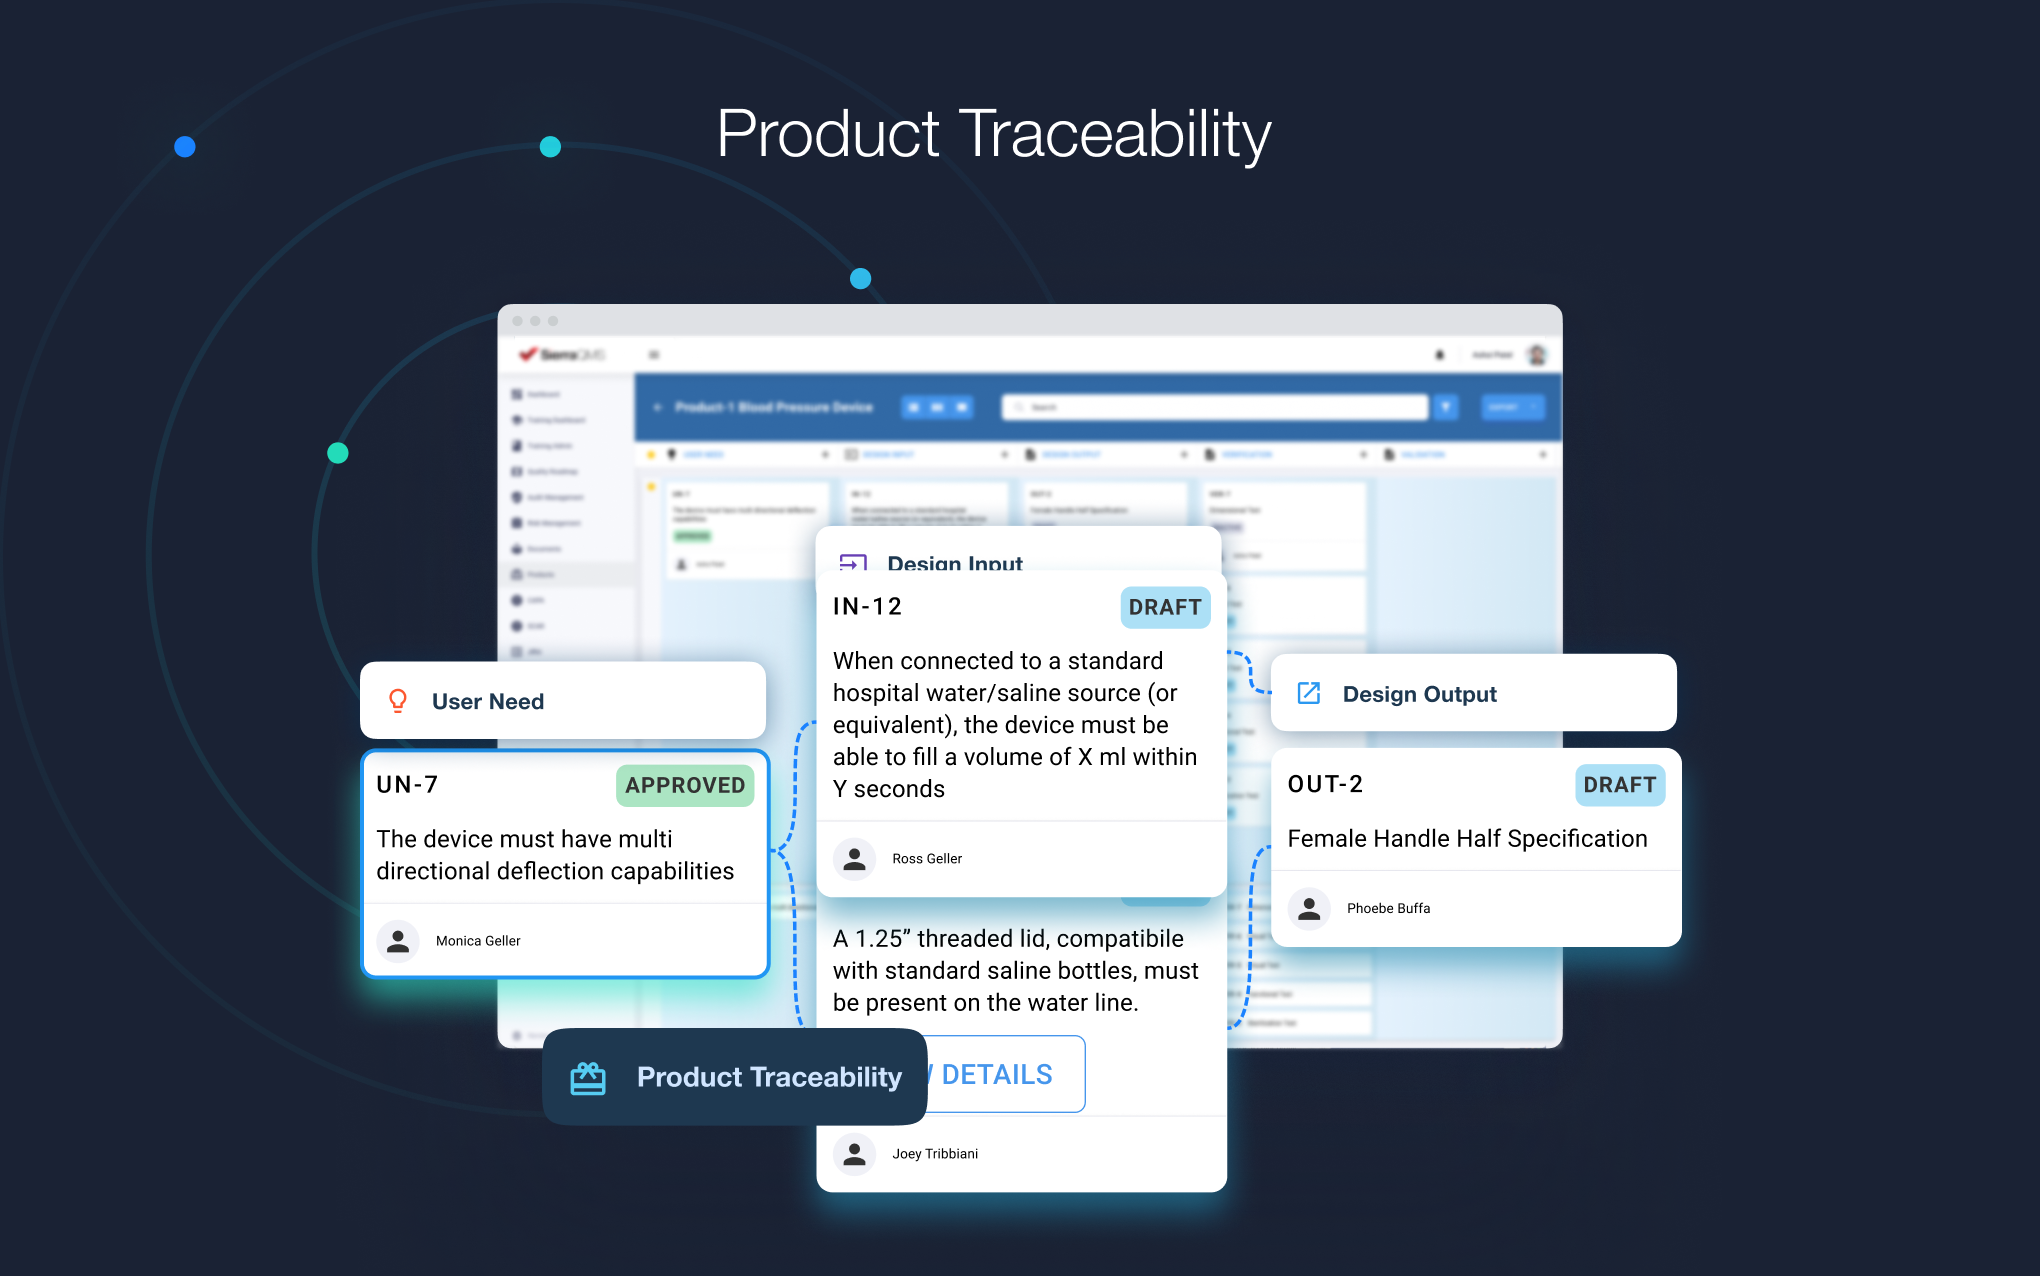 Maintain full traceability at each stage of production. Seamlessly track your product informationand trace it throughout it's entire life cycle to help you easily generate your regulatory documentation.